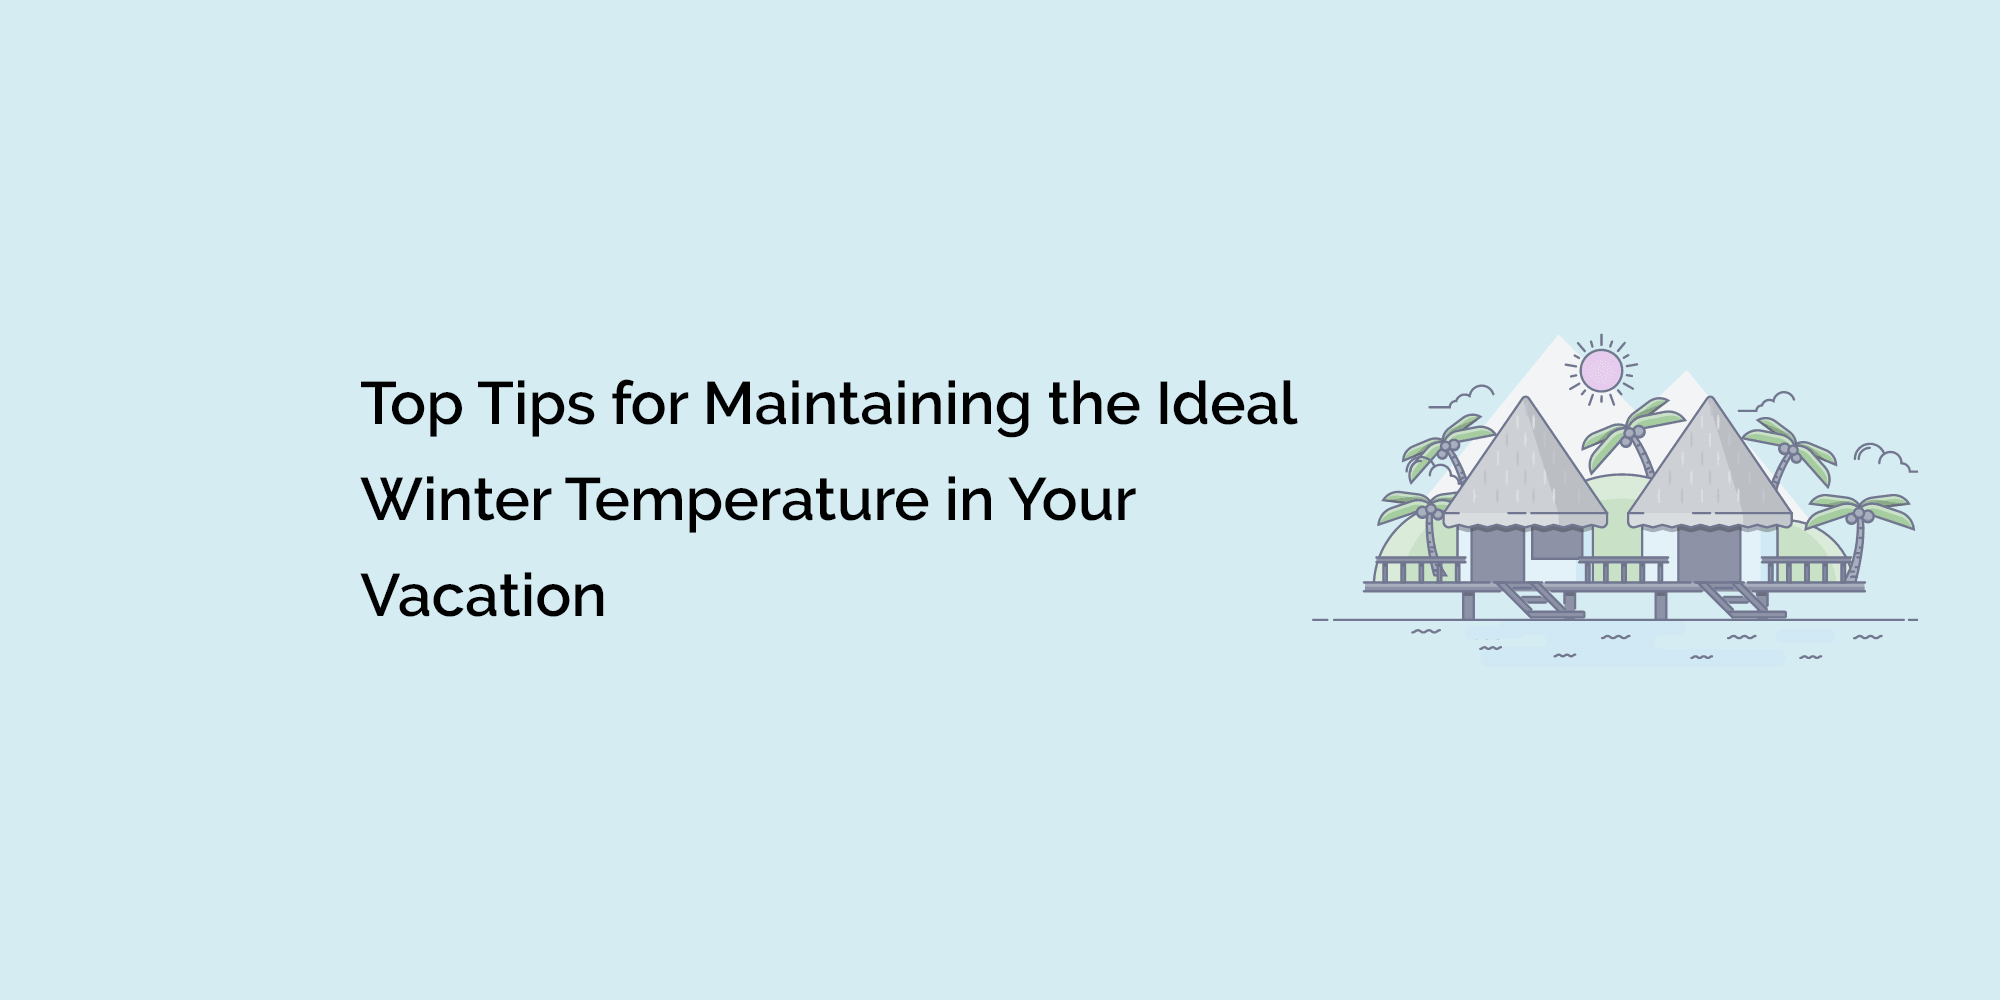 Top Tips for Maintaining the Ideal Winter Temperature in Your Vacation Home